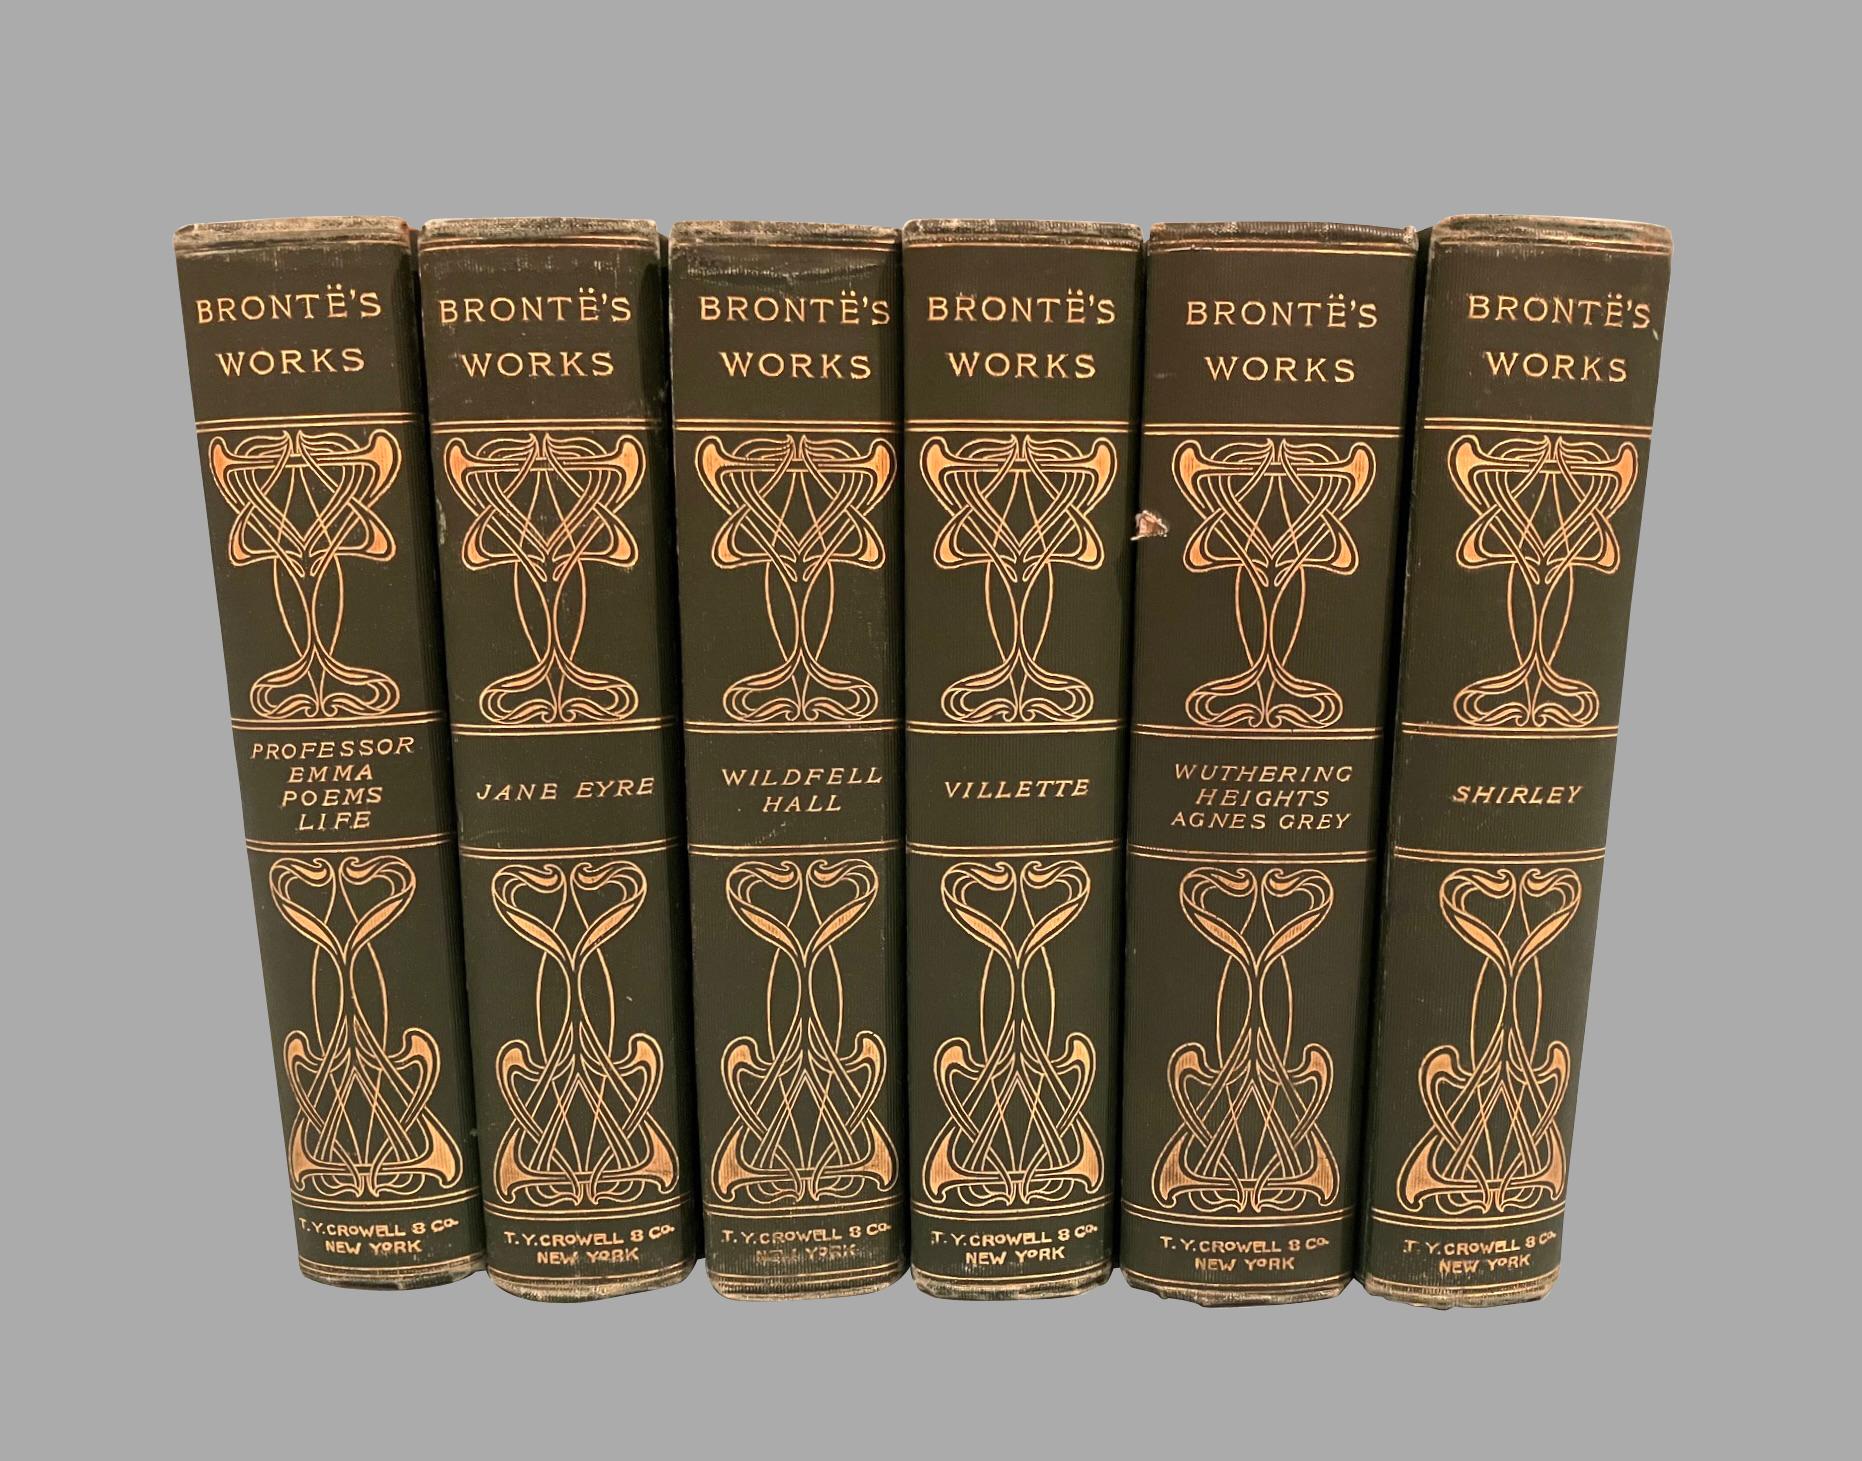 The Complete Works of Charlotte Bronte and Her Sisters with illustrations from photographs. Published by Thomas Y. Crowell and Company, circa 1900-1910. Includes Wuthering Heights by Emily Bronte, Agnes Grey by Anne Bronte Poems by Charlotte Bronte